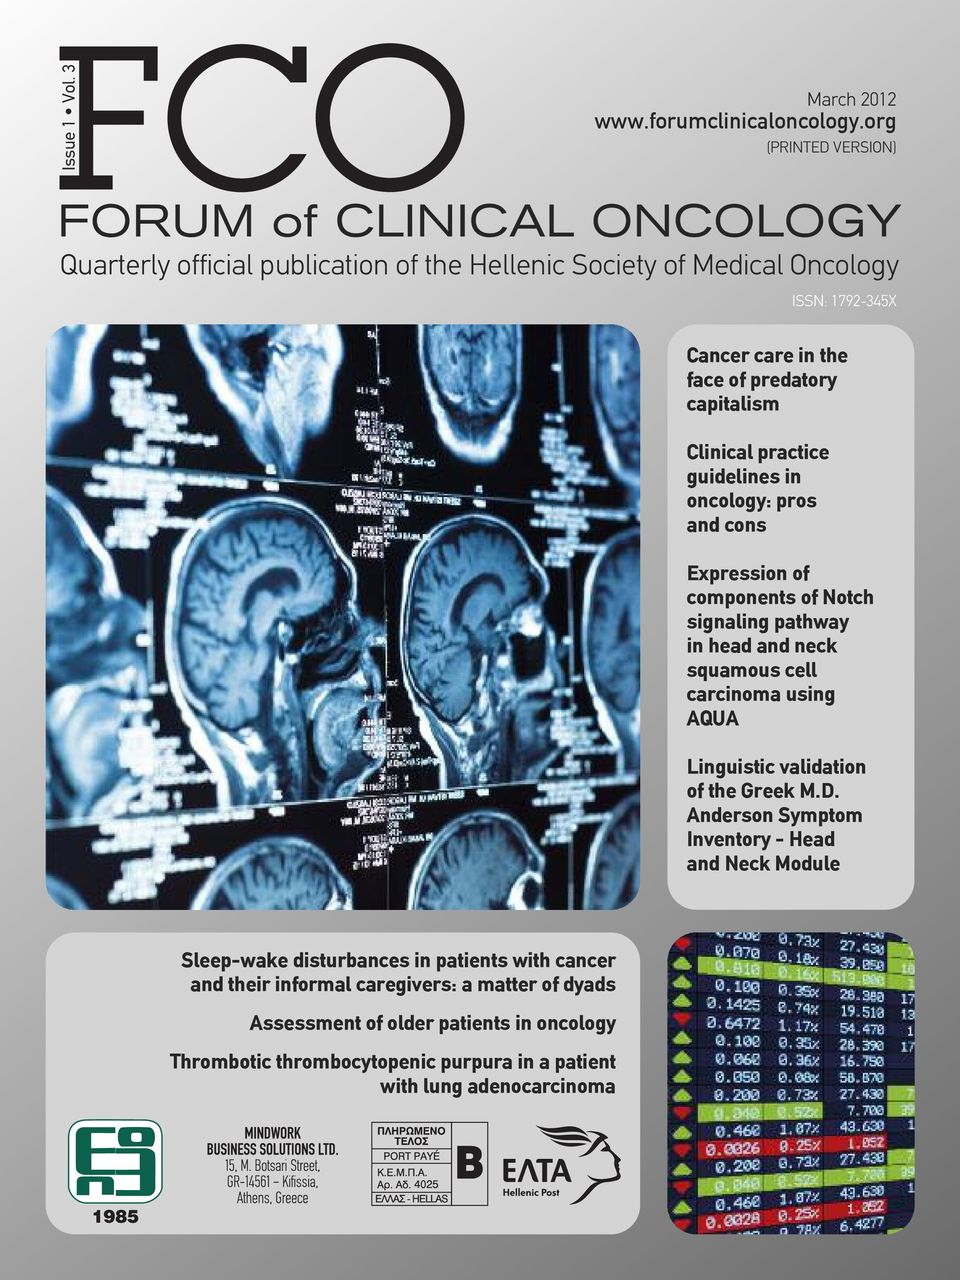 Clinical practice guidelines in oncology: pros and cons ISSN: 1792-345X Expression of components of Notch signaling pathway in head and neck squamous cell carcinoma using AQUA